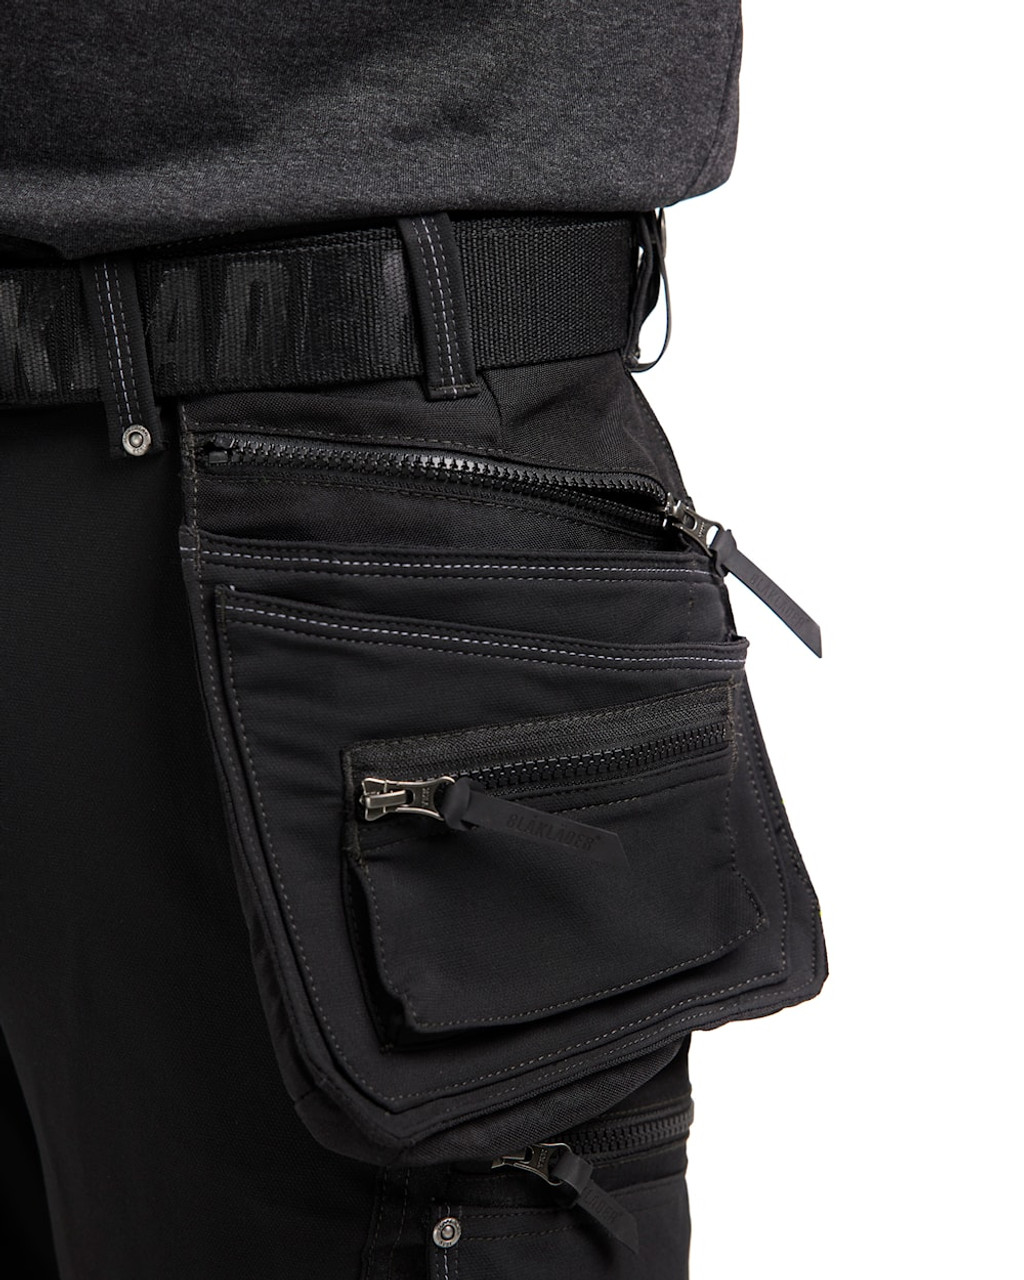 BLAKLADER 4-Way Stretch Black Shorts for Carpenters that have Kneepad Pockets  available in Australia and New Zealand